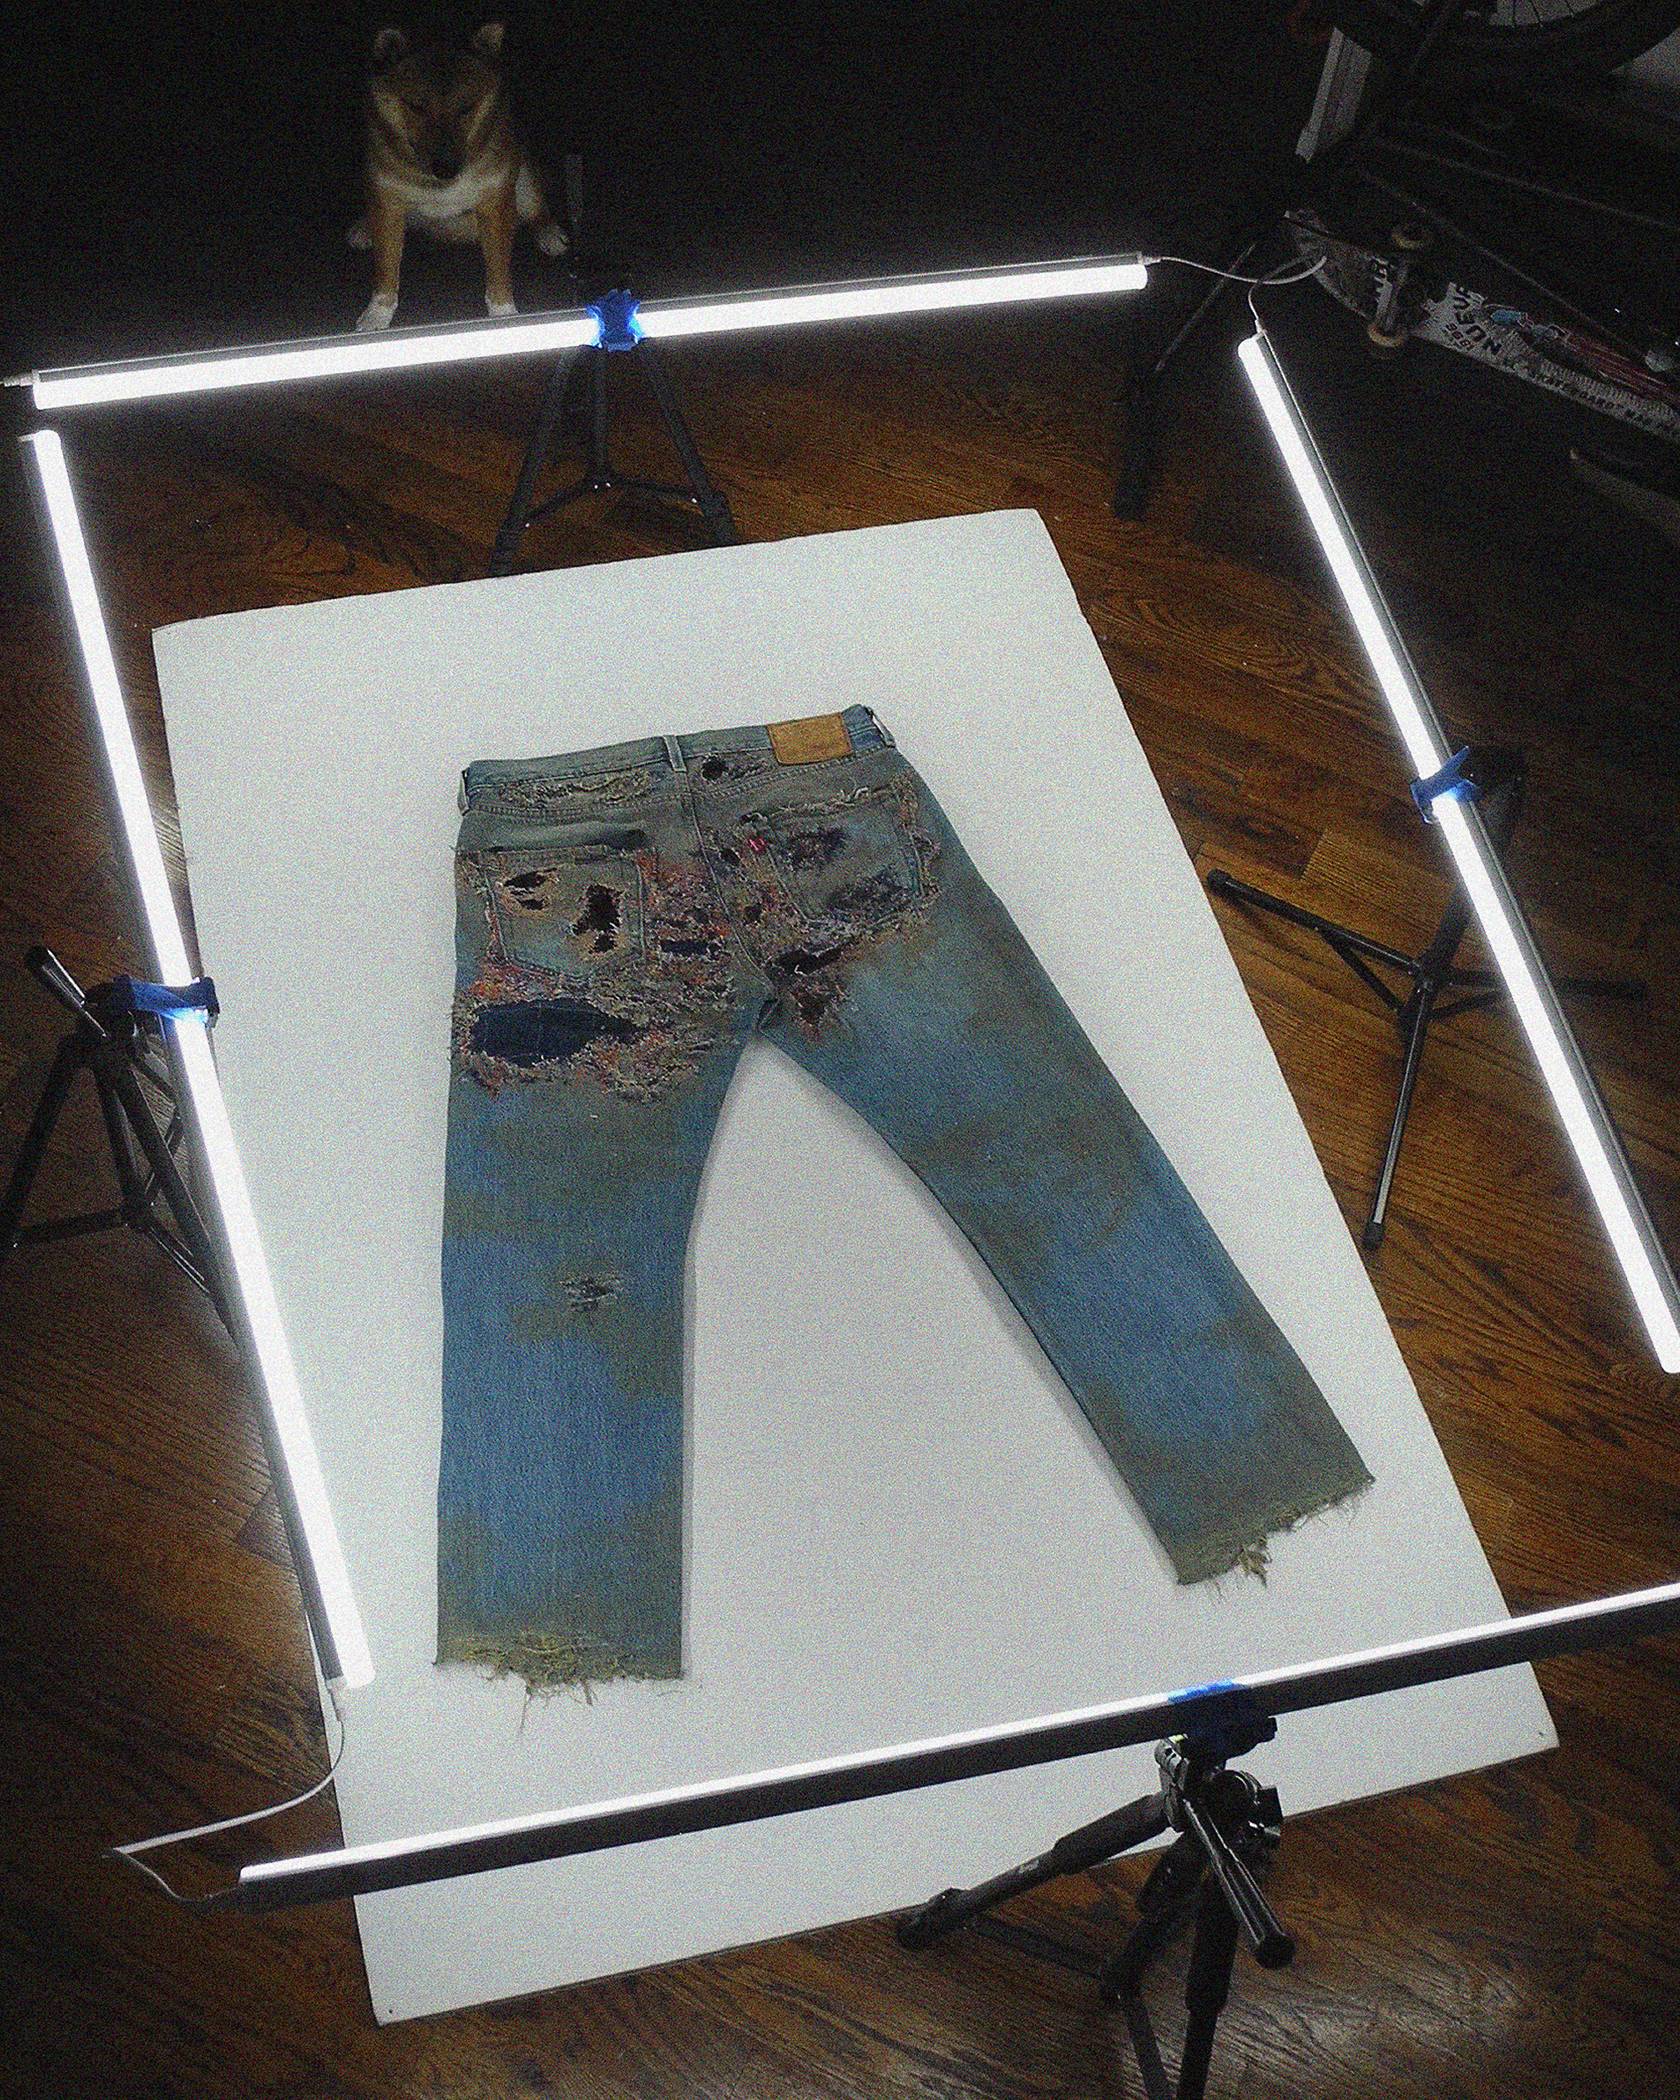 Phillip Leyesa's Levi's 501 Jeans after the customization process being photographed with studio lighting on a wooden floor.